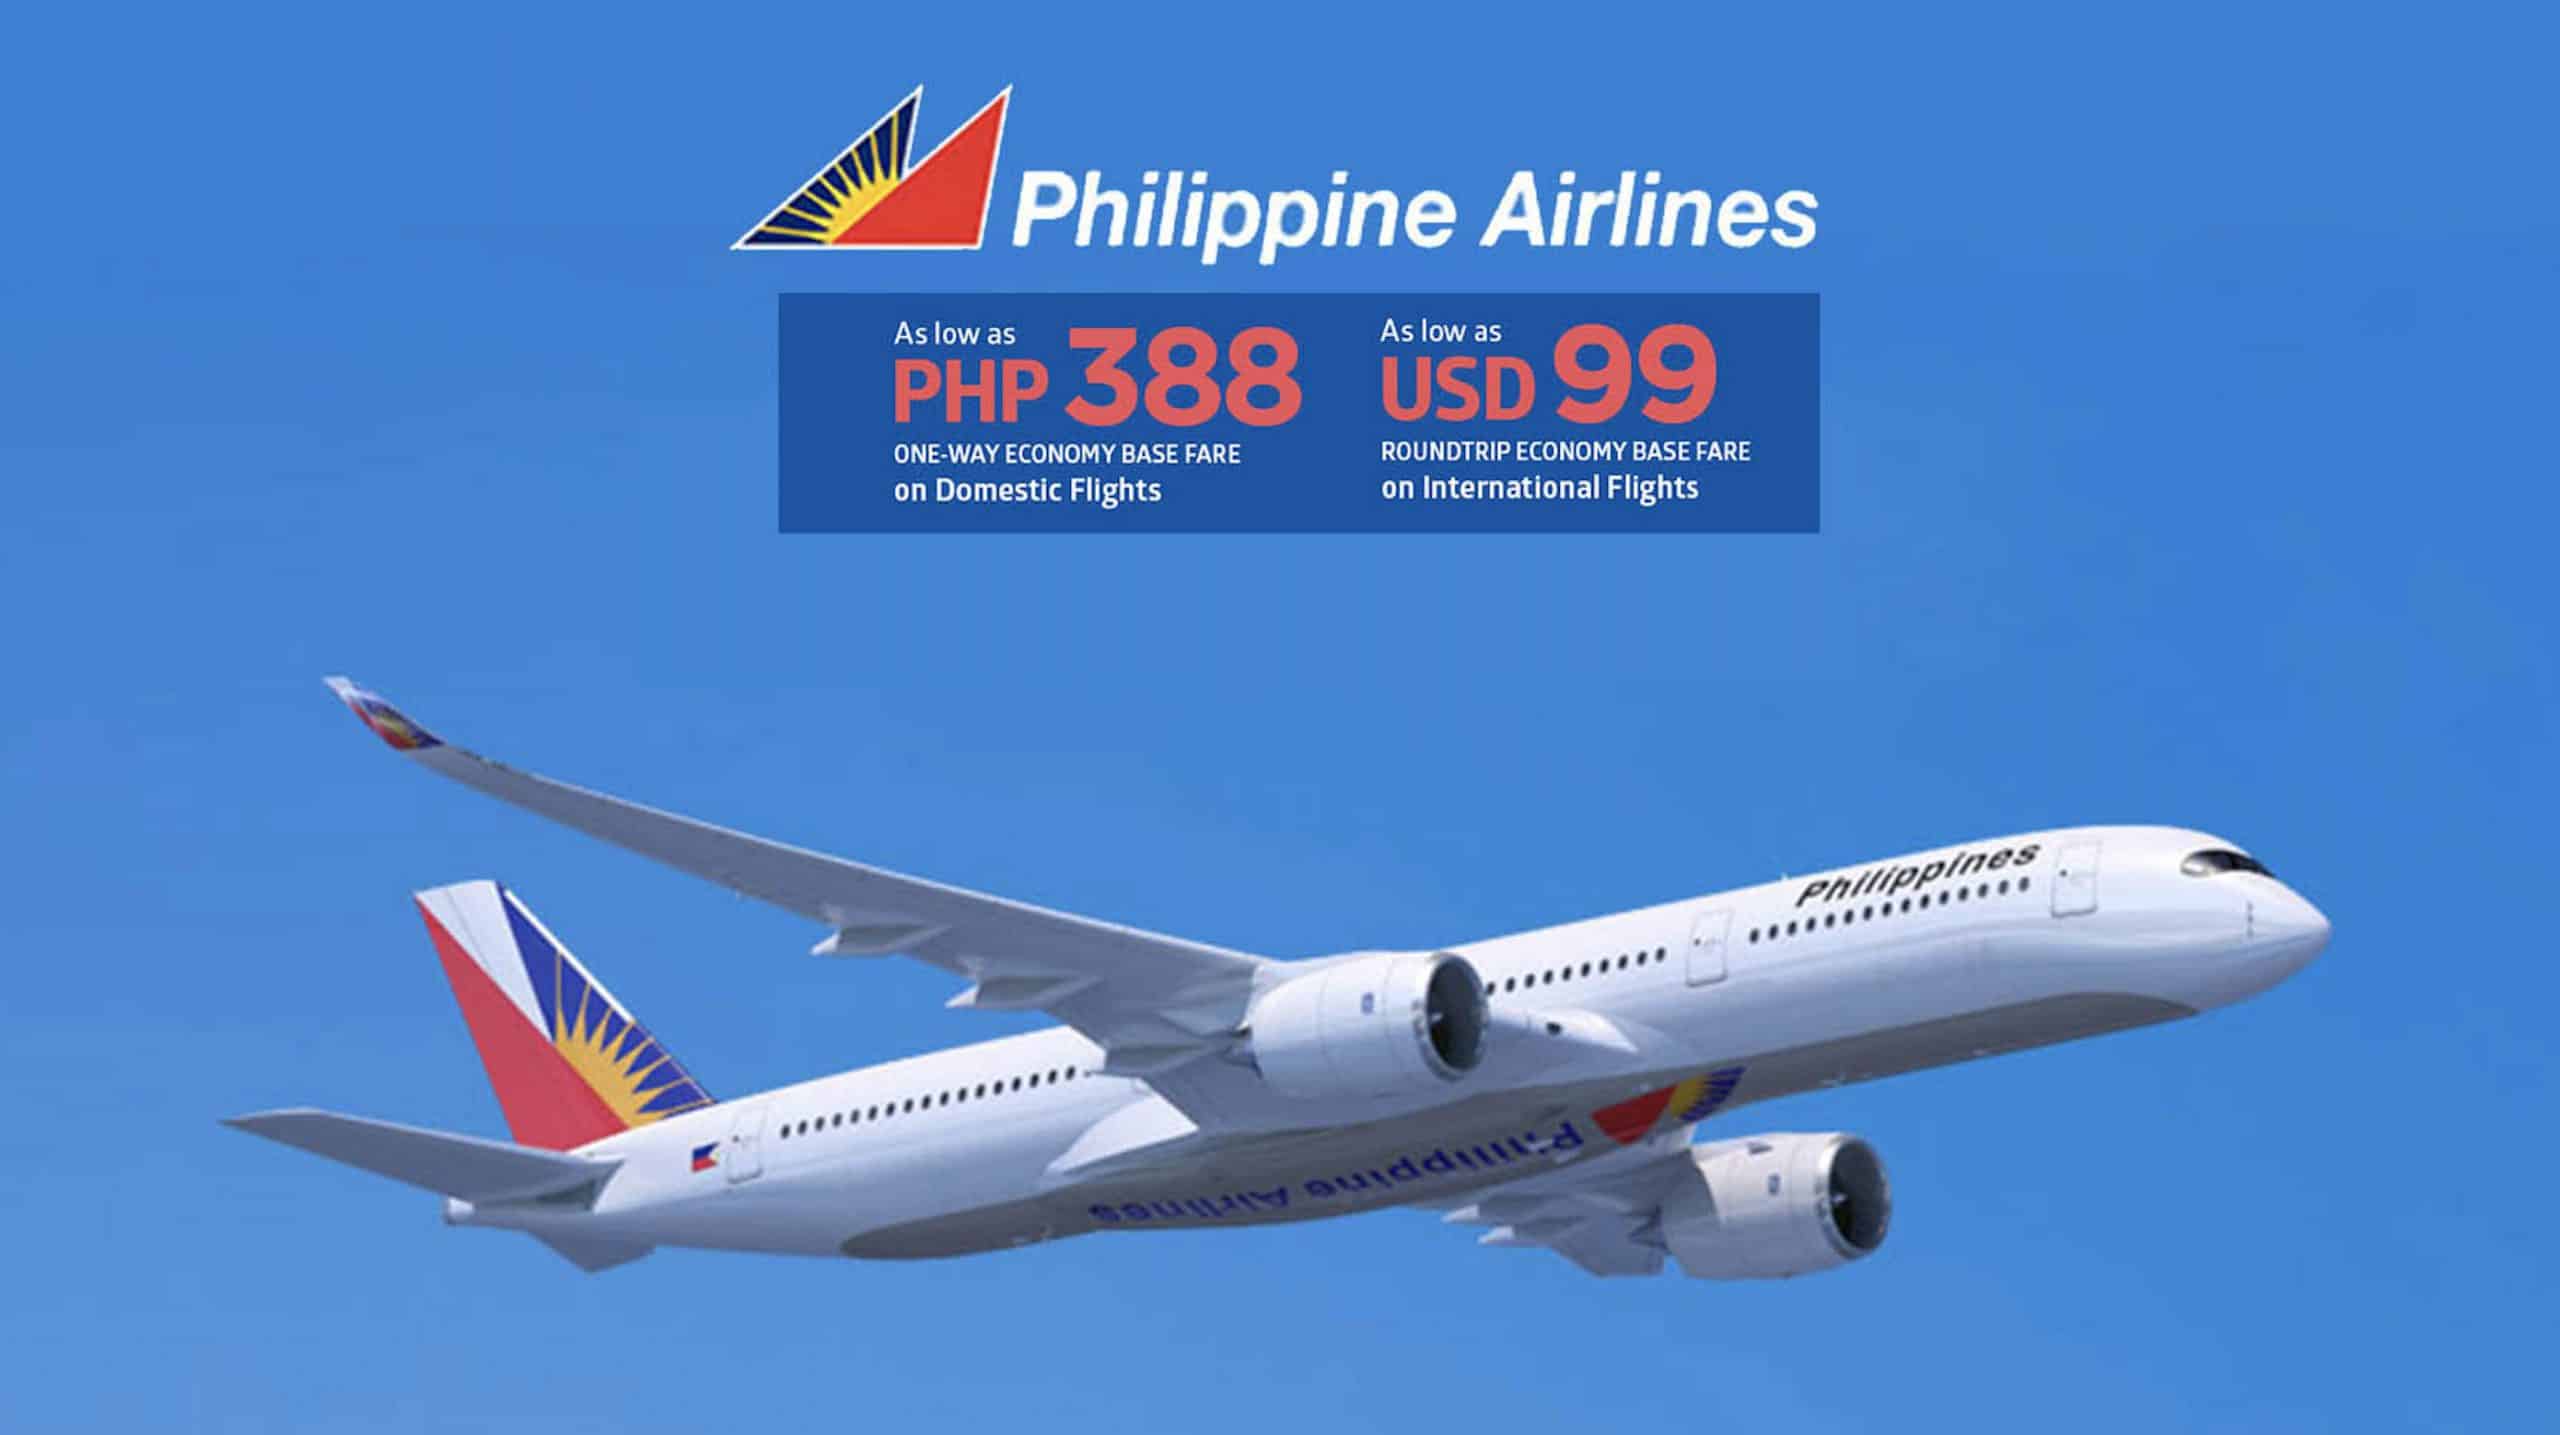 PHILIPPINE AIRLINES PROMO: How to Book Successfully